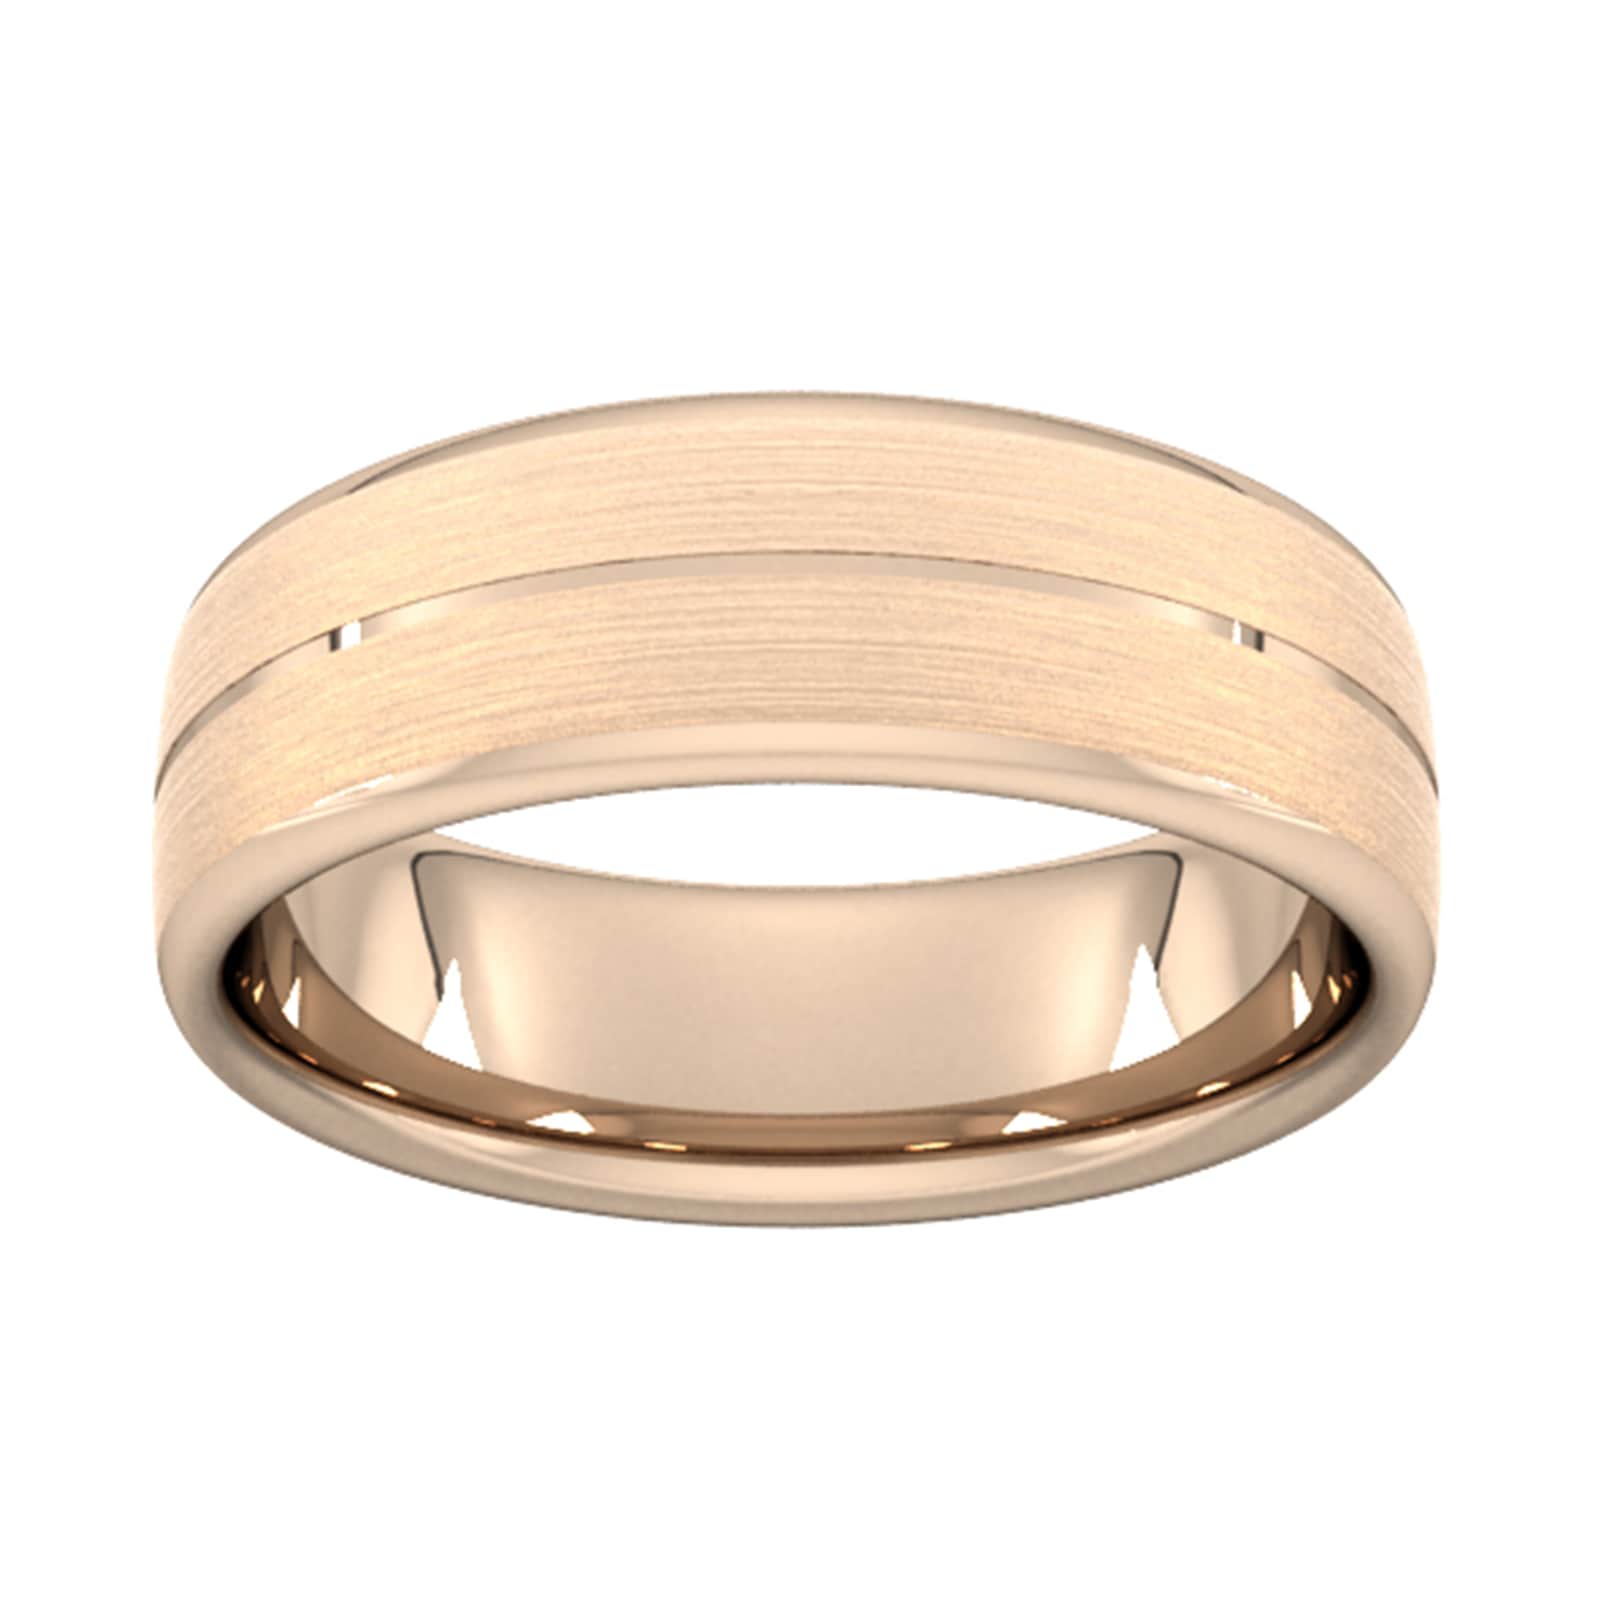 7mm Traditional Court Heavy Centre Groove With Chamfered Edge Wedding Ring In 18 Carat Rose Gold - Ring Size I